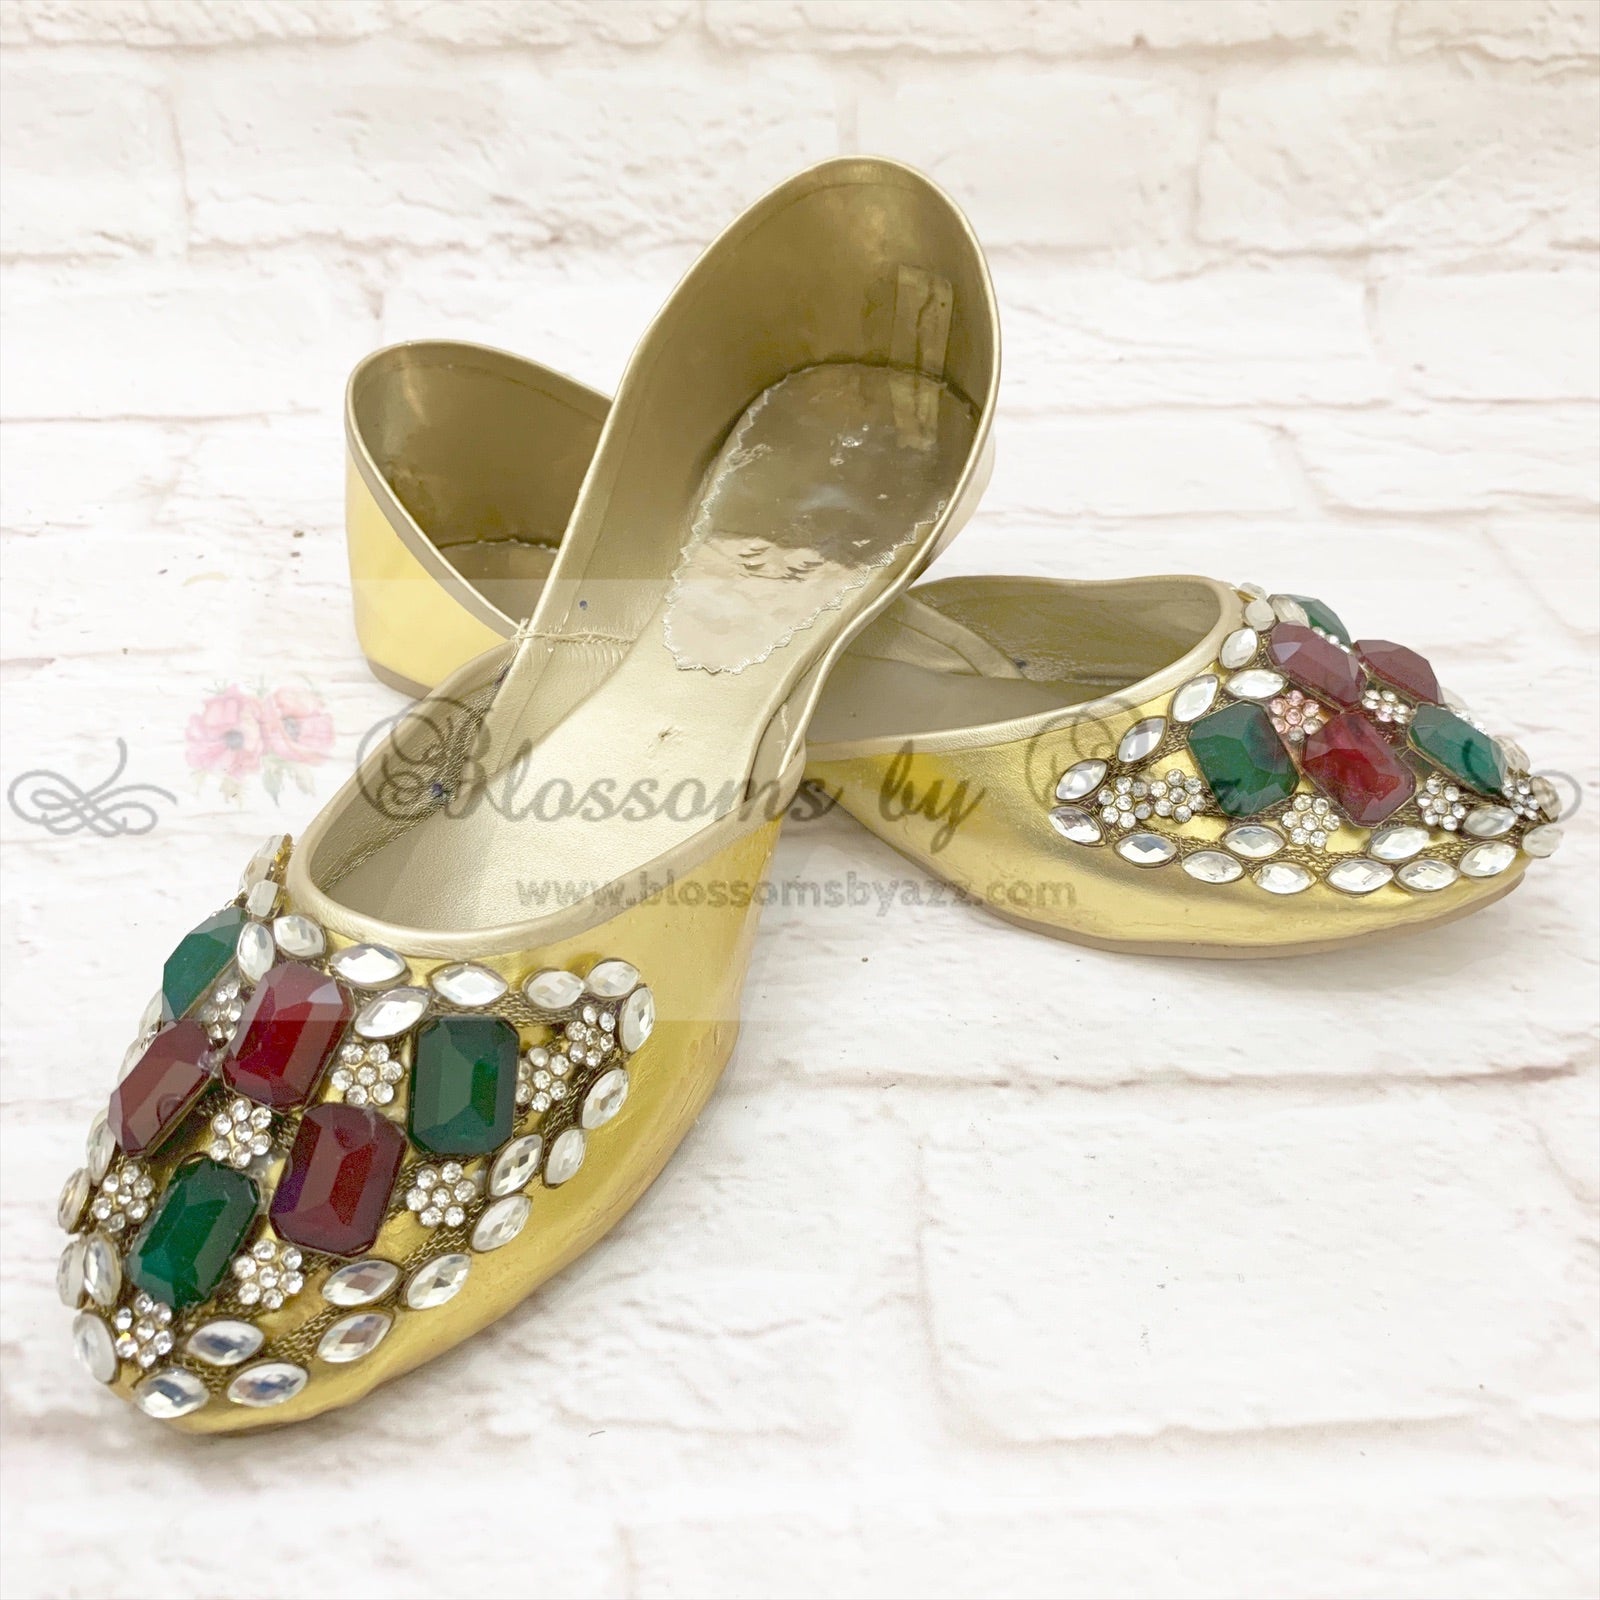 Stone Pumps (Khussa) - 001- Red & Green - Blossoms by Azz